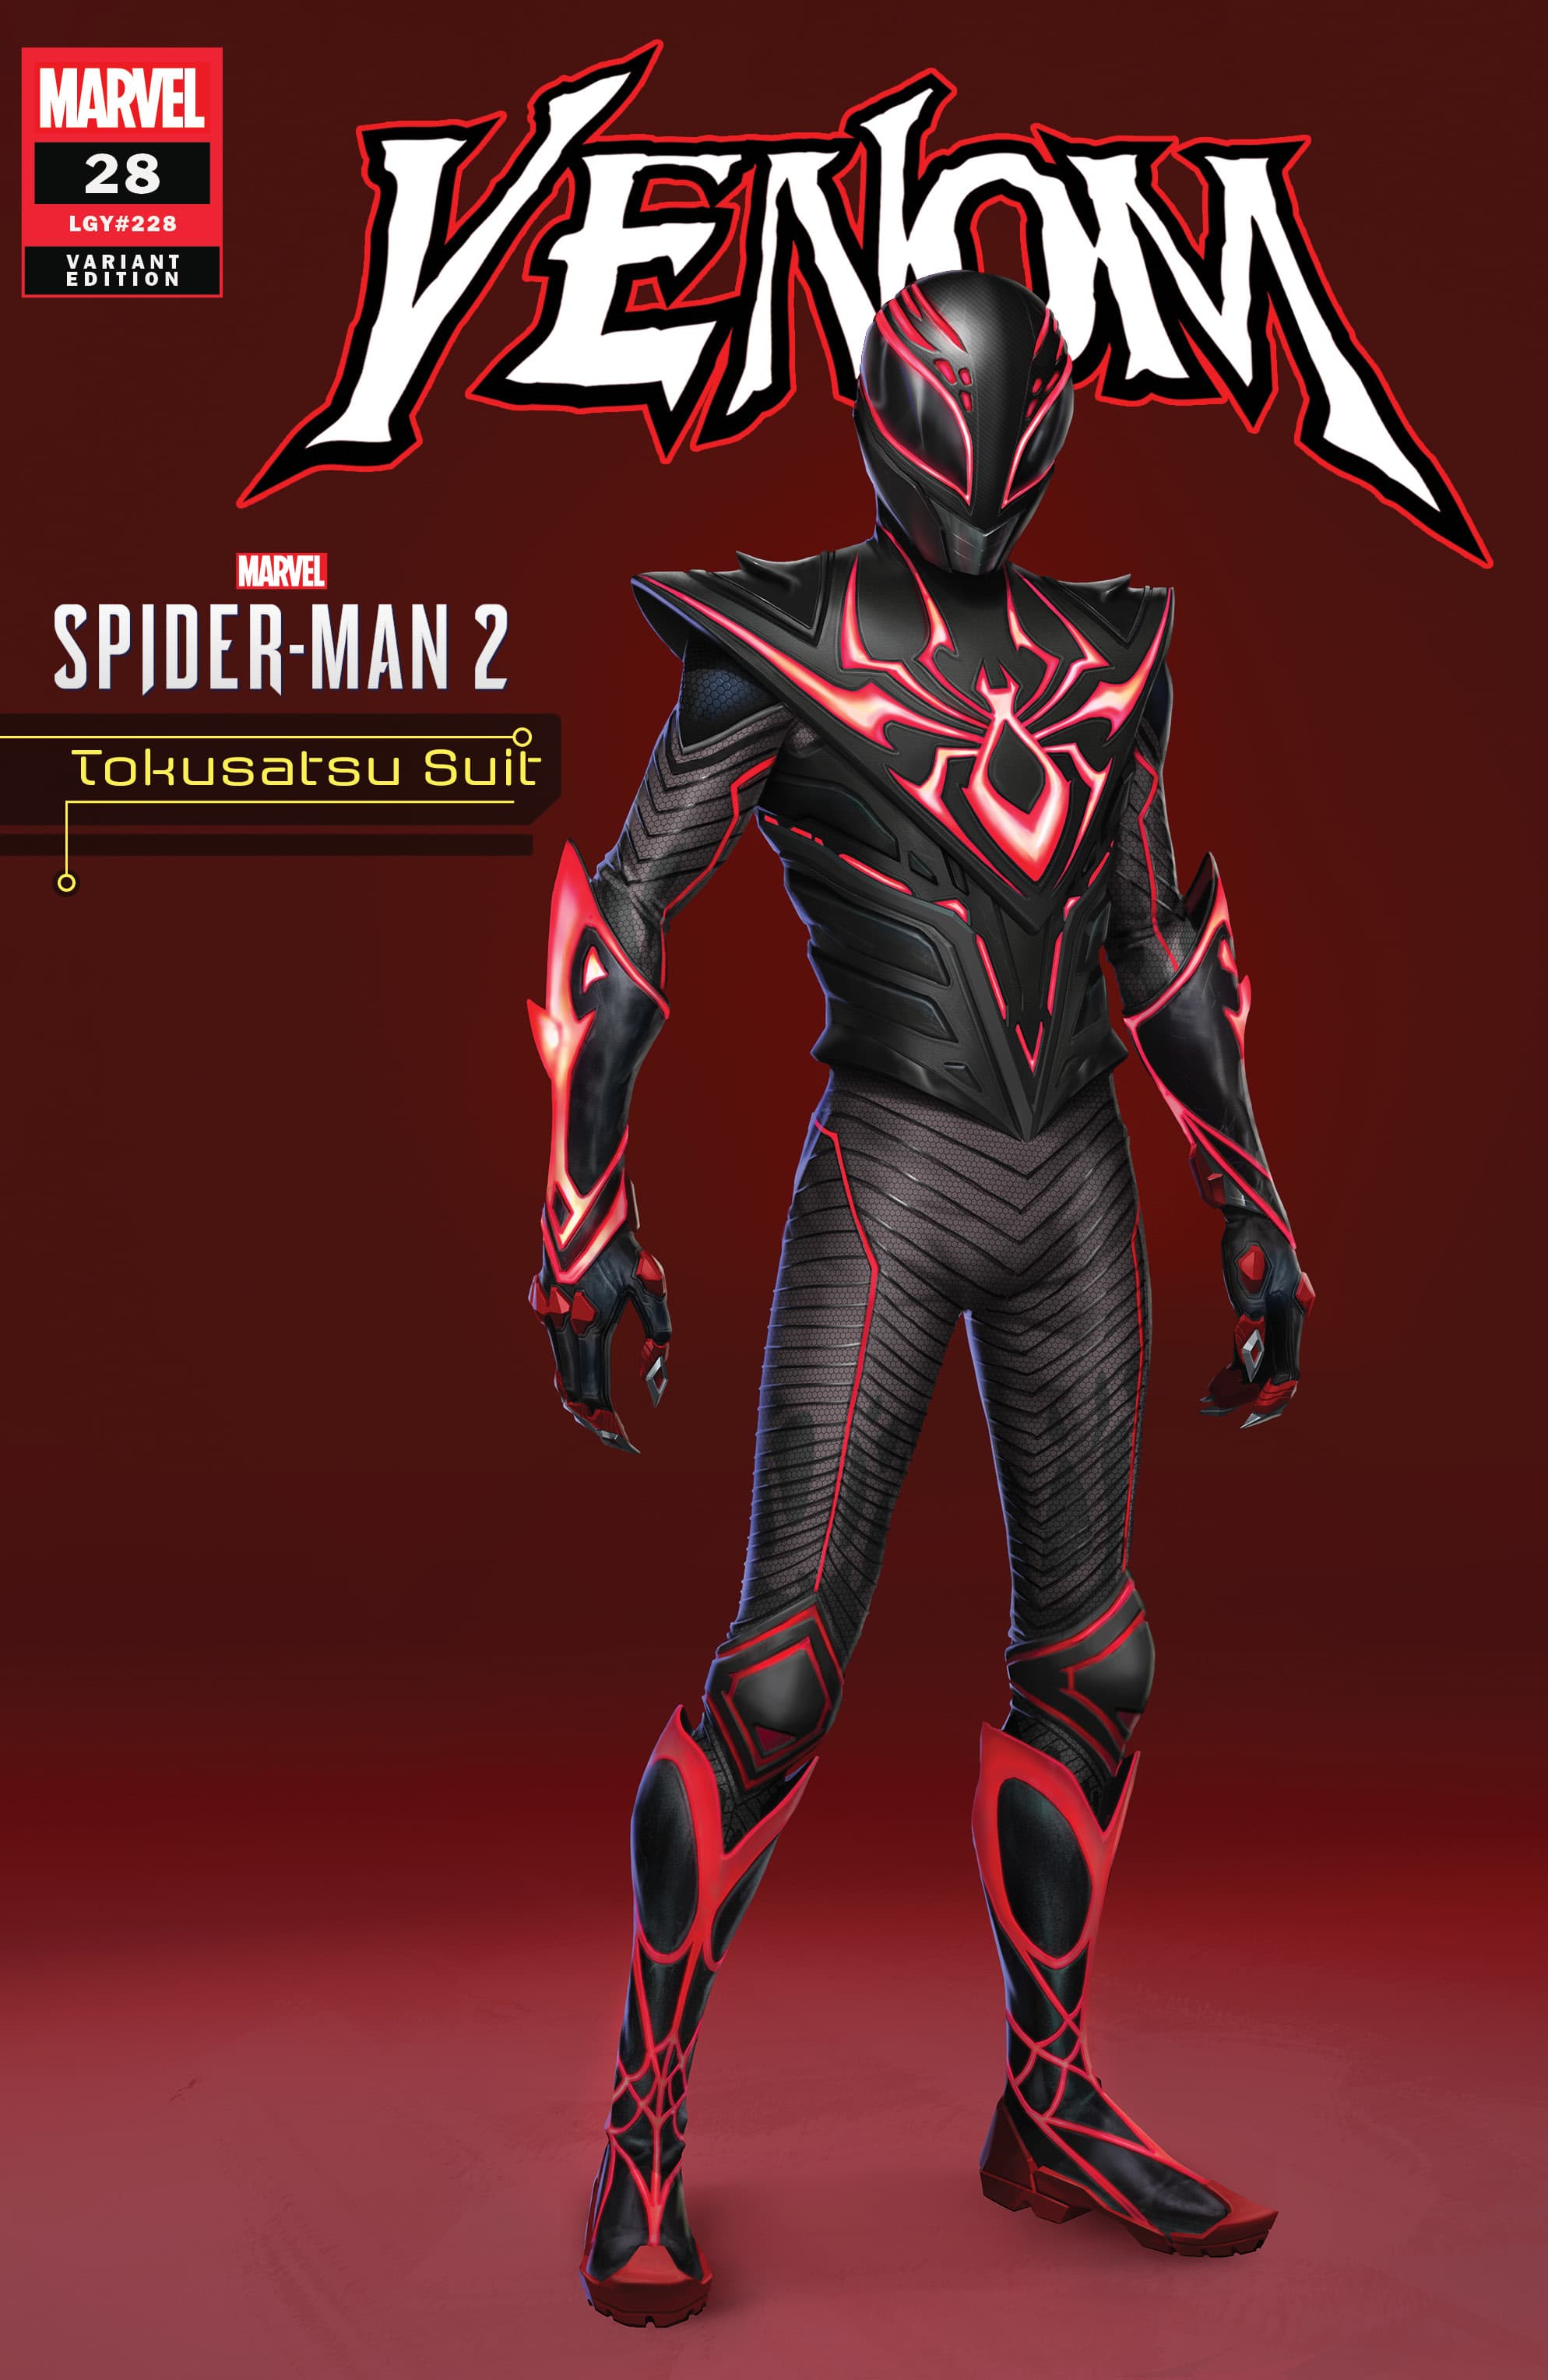 Variant Covers Spotlight New Spidey Suits Debuting in Marvel's 'Spider-Man  2' Video Game